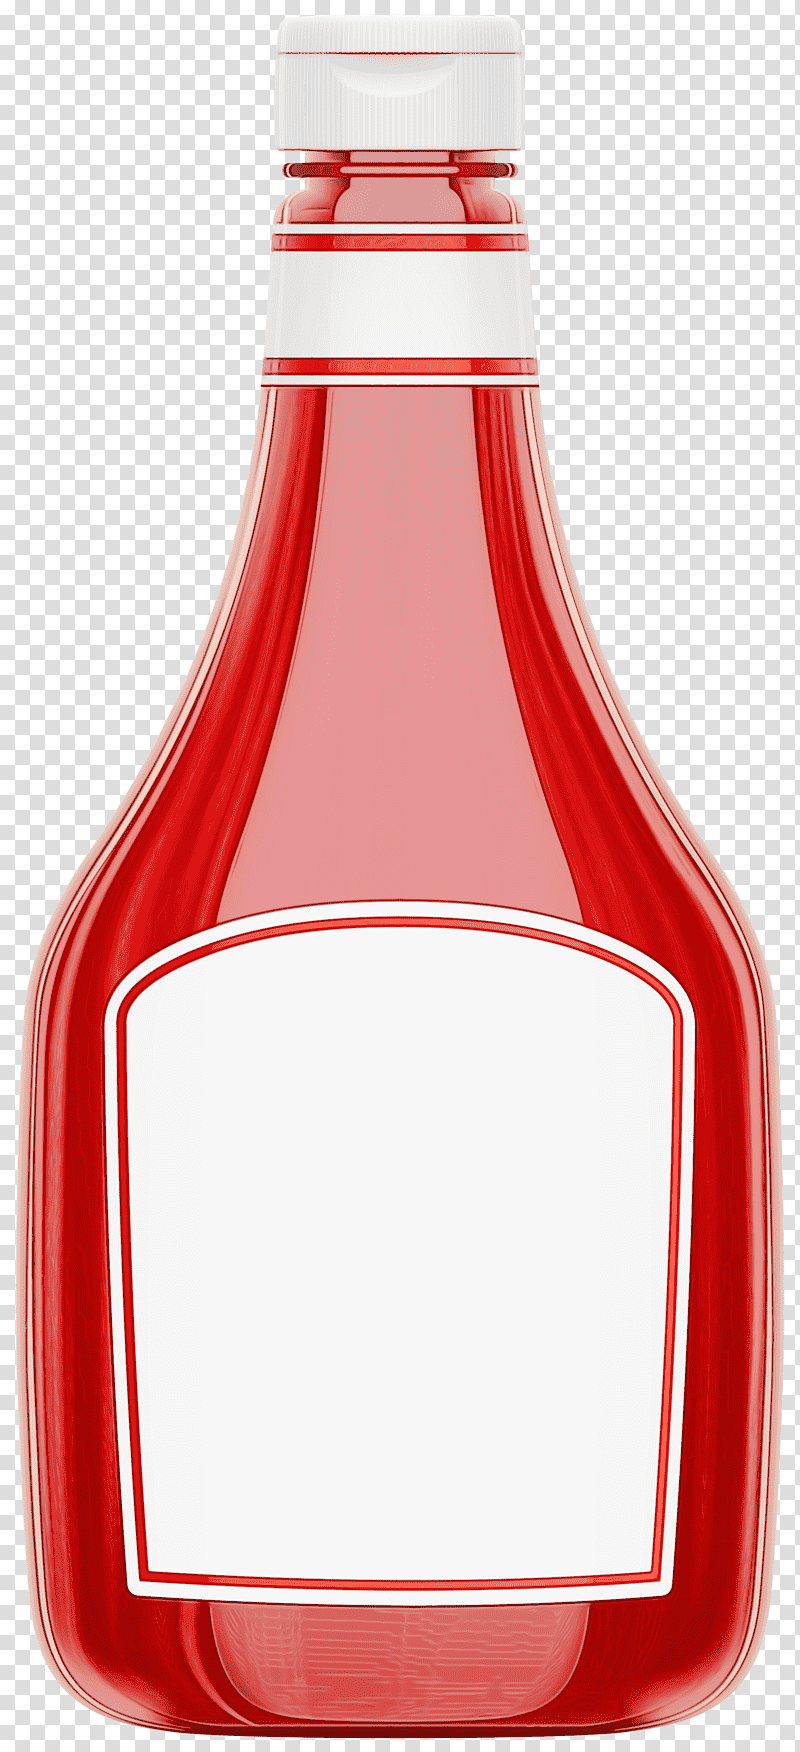 Red plastic ketchup bottle , Ketchup H. J. Heinz Company , Ketchup  transparent background PNG clipart